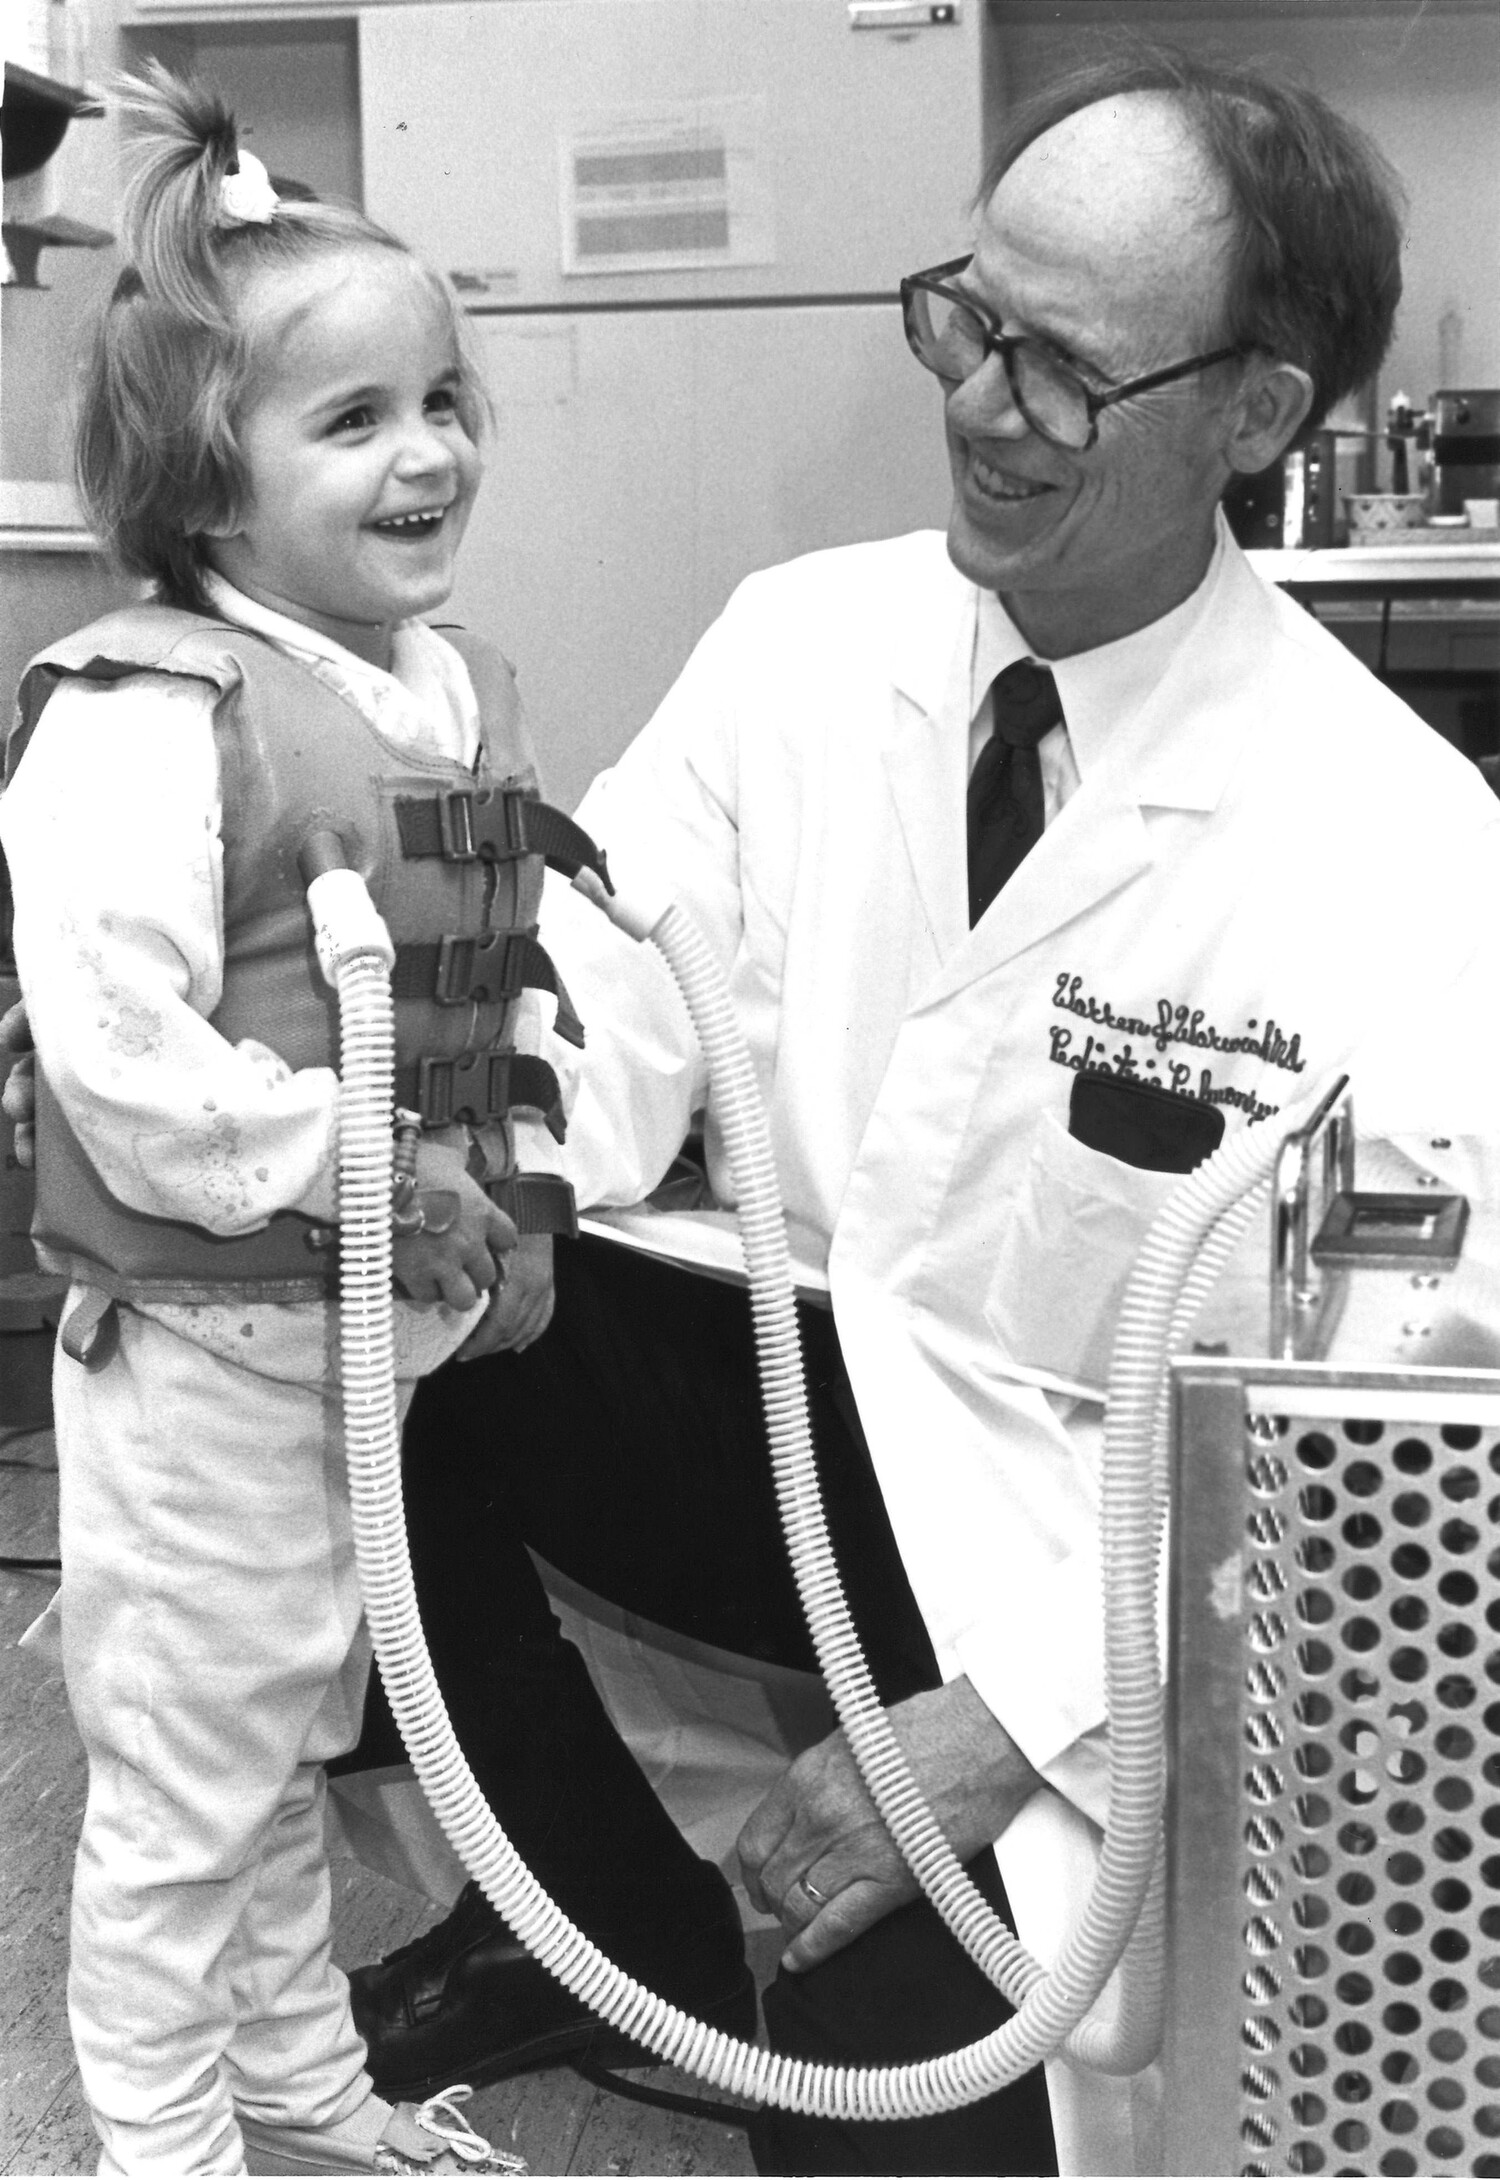 A photo of a young child wearing a chest-compression vest while smiling and standing next to a doctor